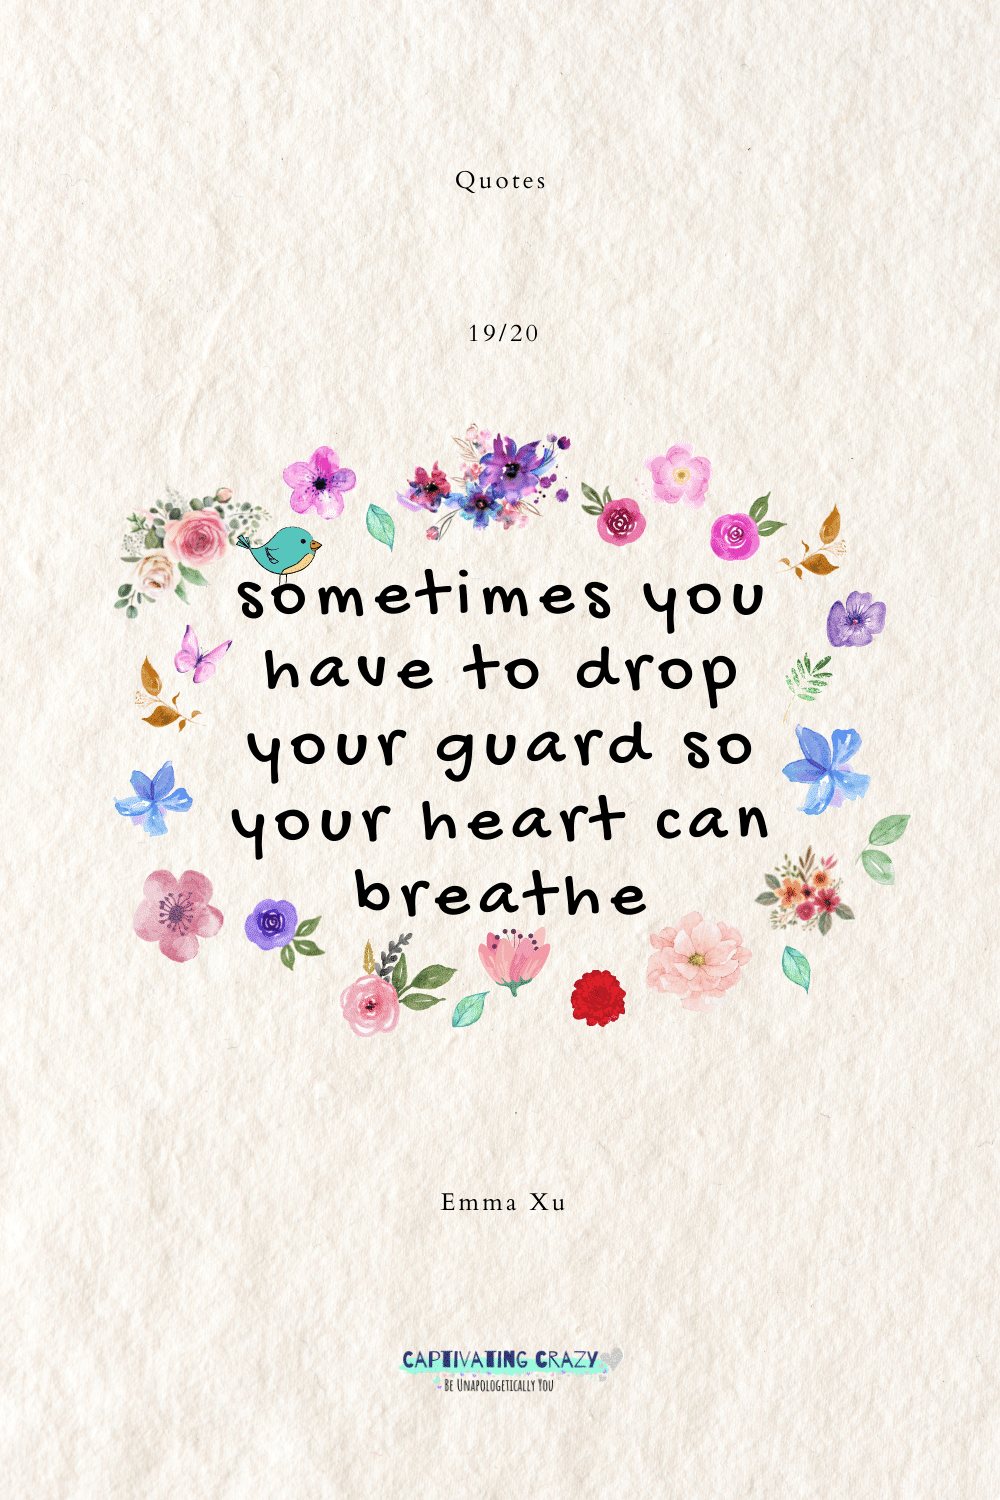 Sometimes you have to drop your guard so your heart can breathe. Emma Xu